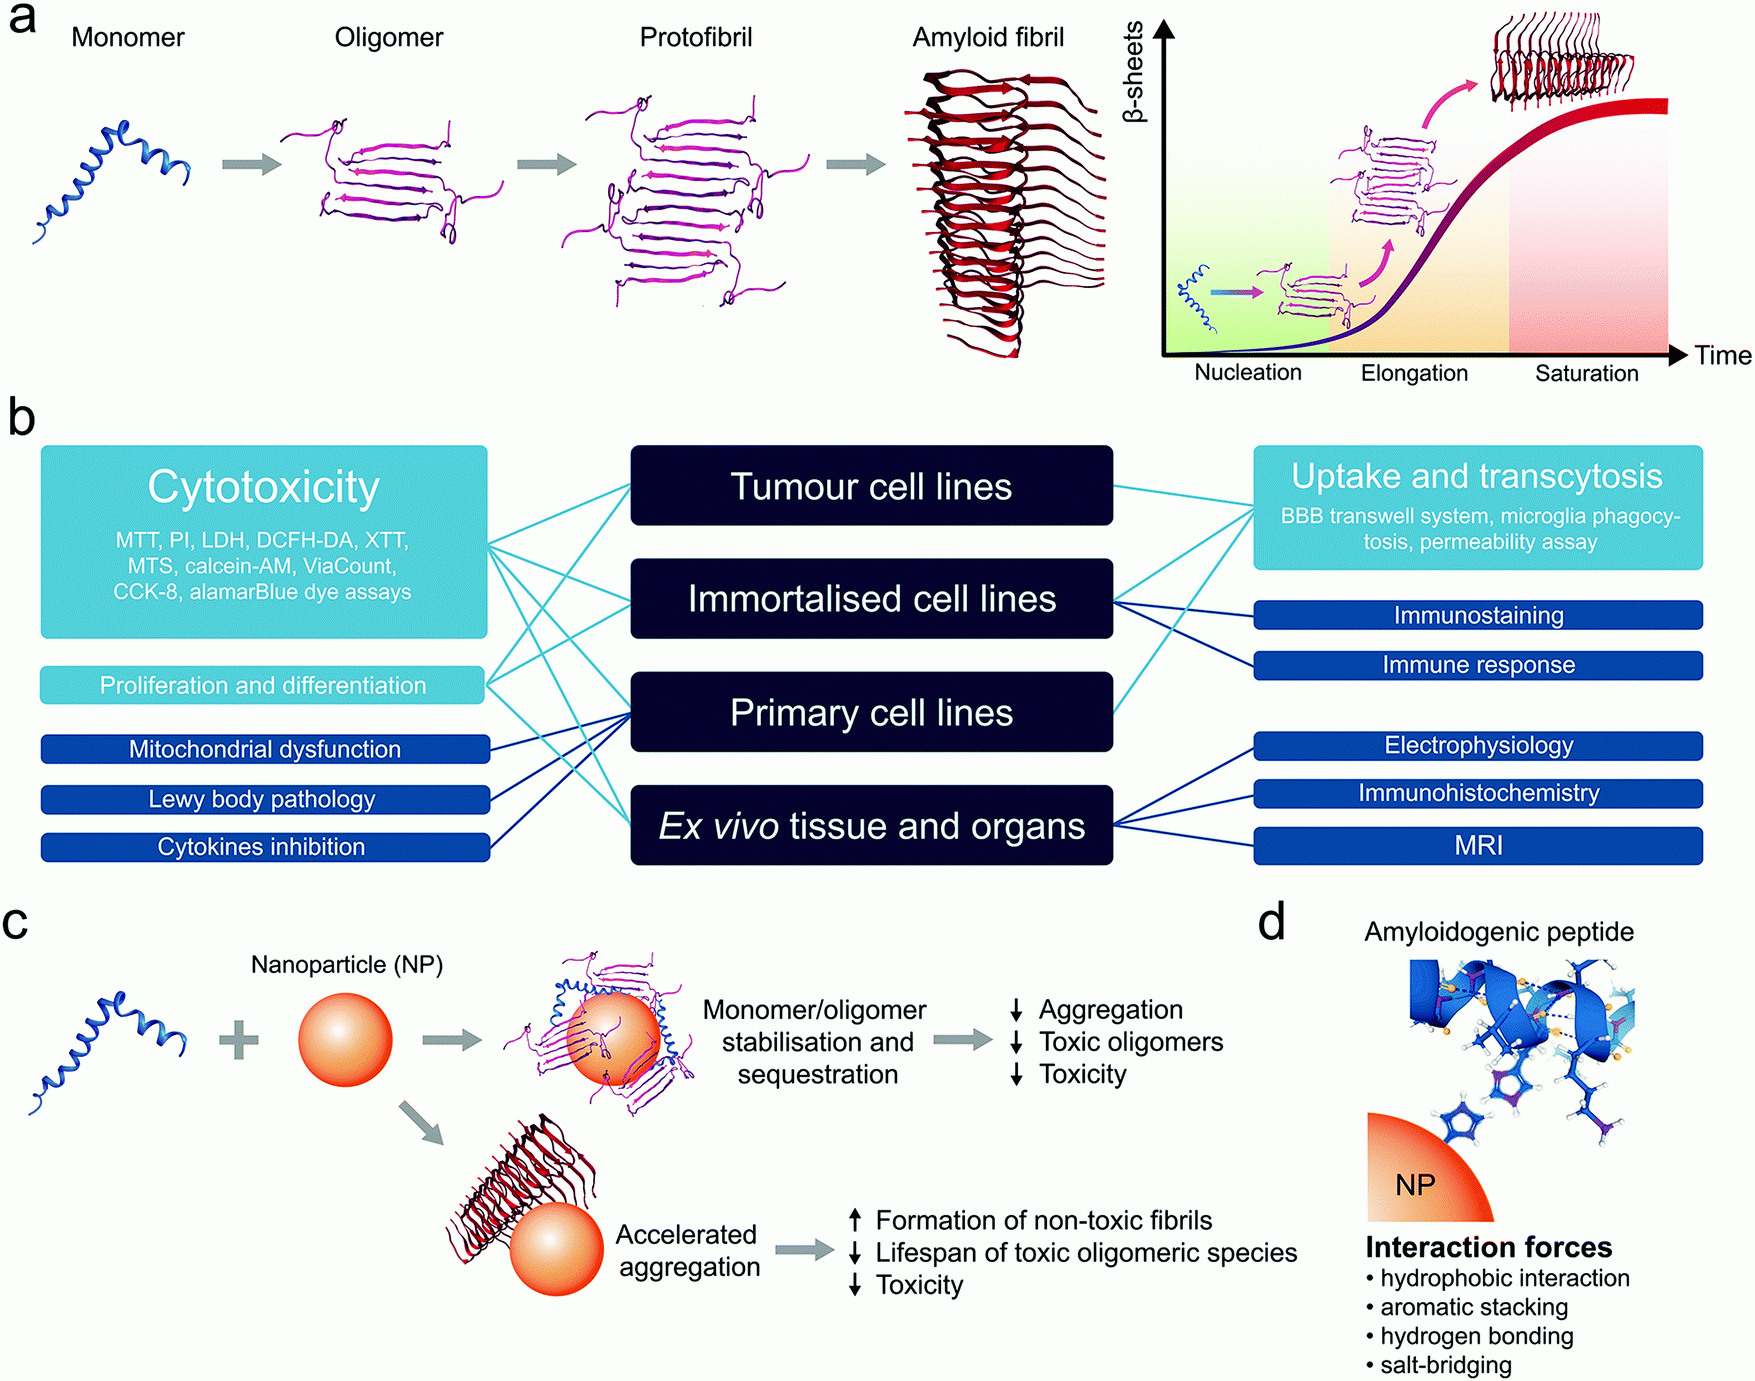 In Vitro And In Vivo Models For Anti-Amyloidosis